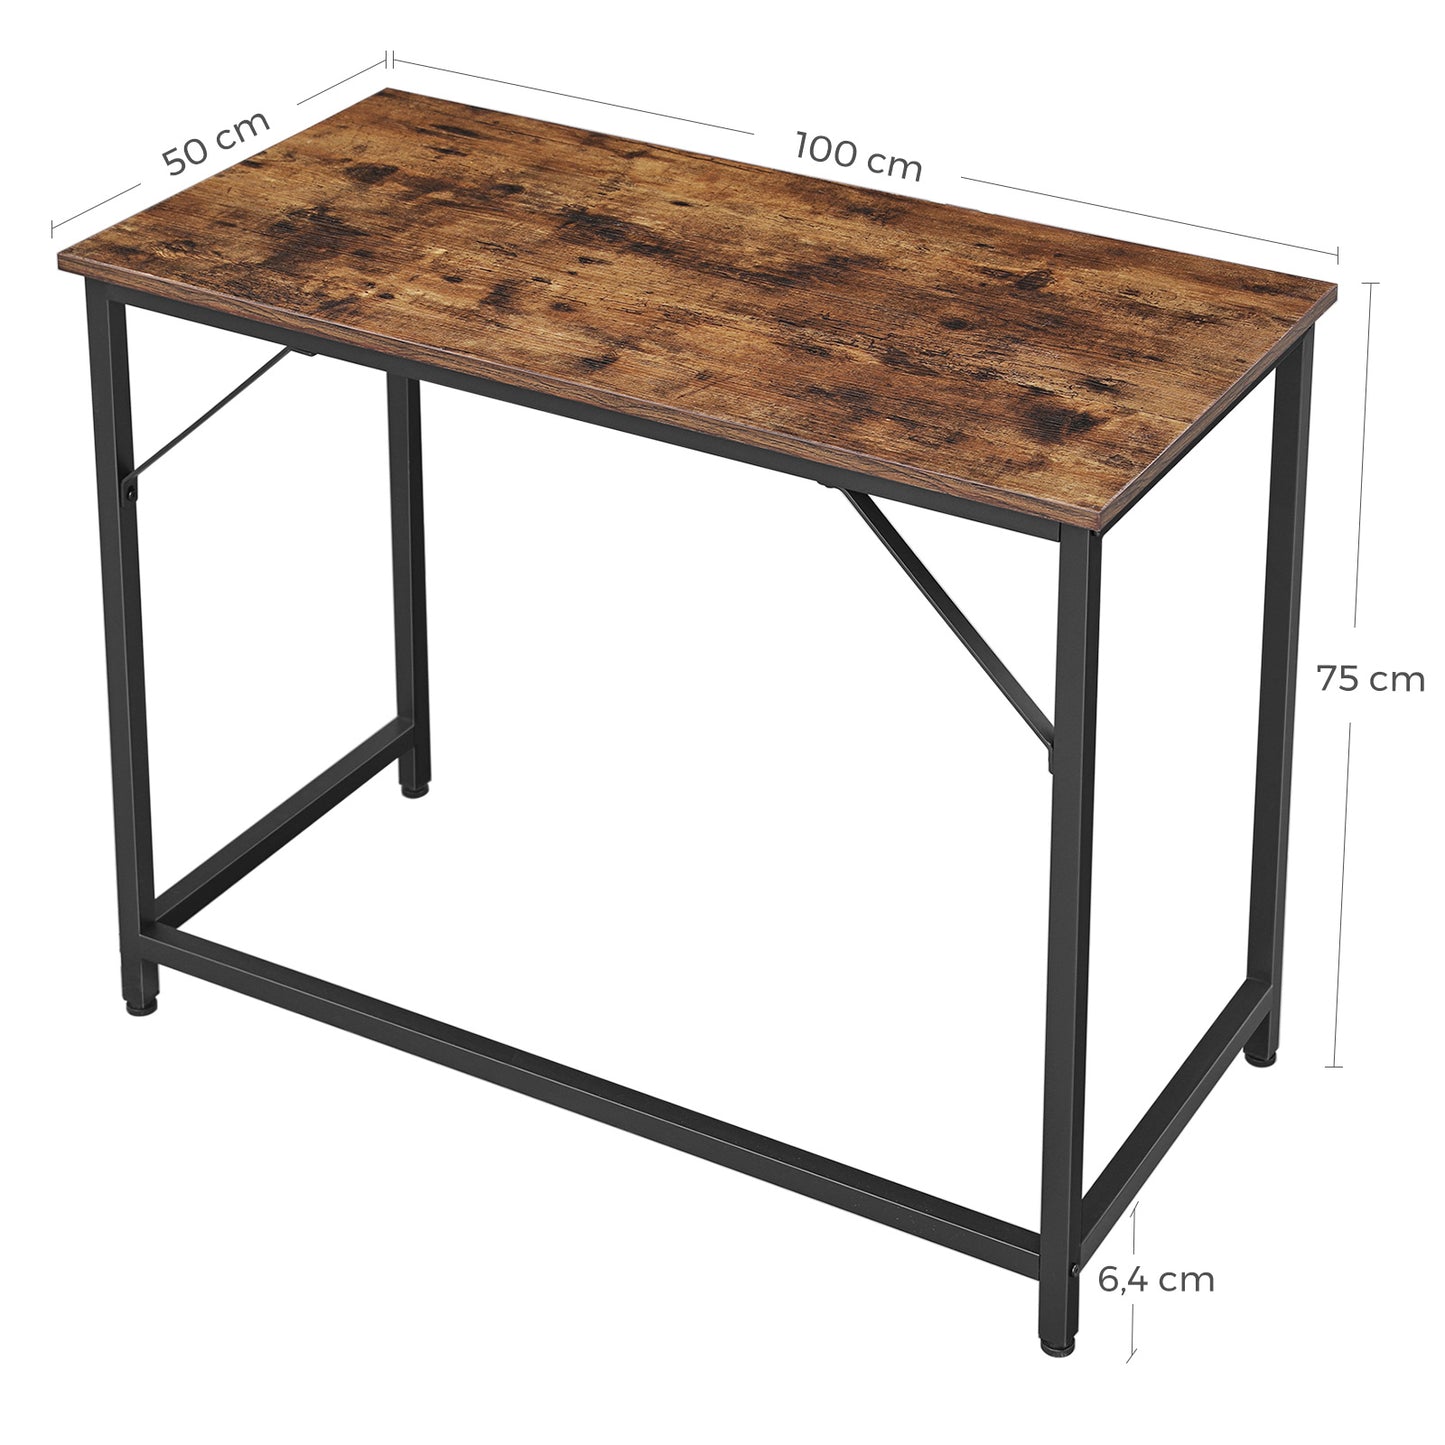 VASAGLE - Writing Desk, Computer Desk, Small Office Table, 100 x 50 x 75 cm, Study, Home Office, Simple Assembly, Metal